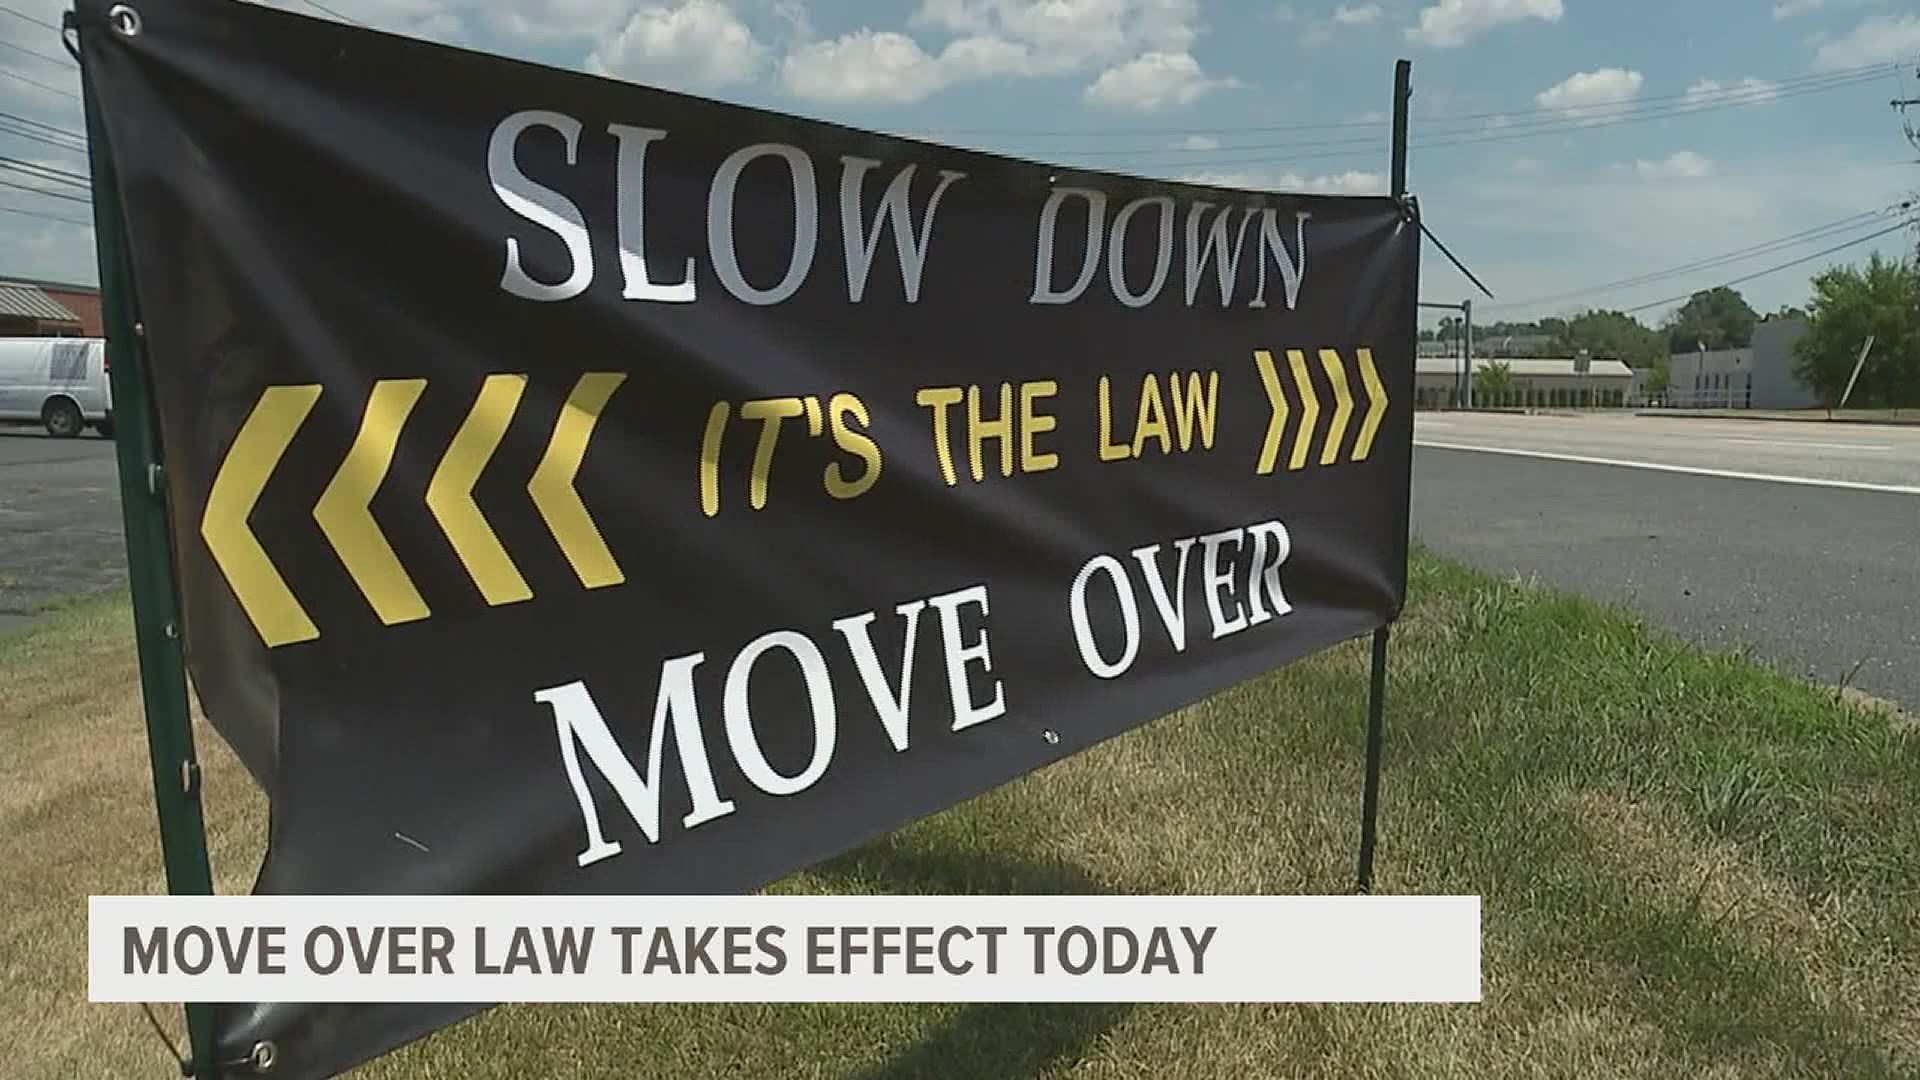 The law comes with harsher penalties if drivers don't move over or slow down when approaching emergency scenes or disabled vehicle.